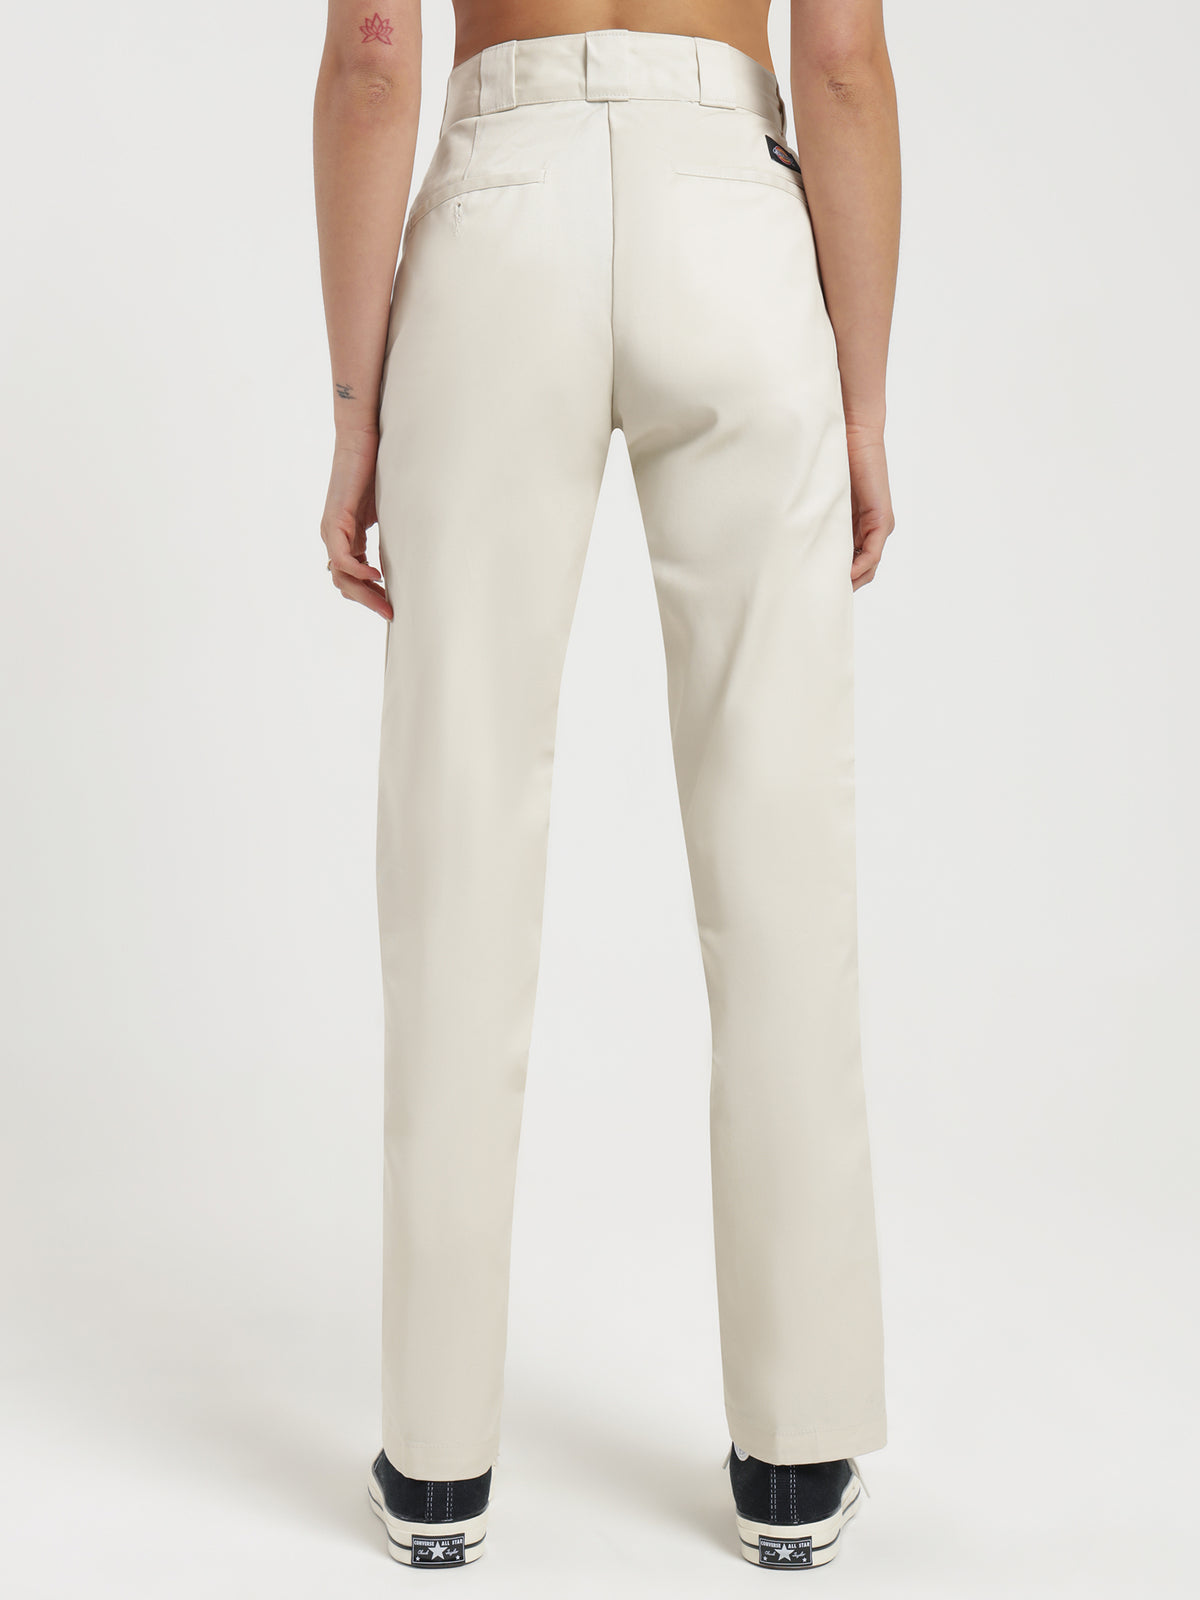 875 Tapered Fit Pants in Bone - Glue Store